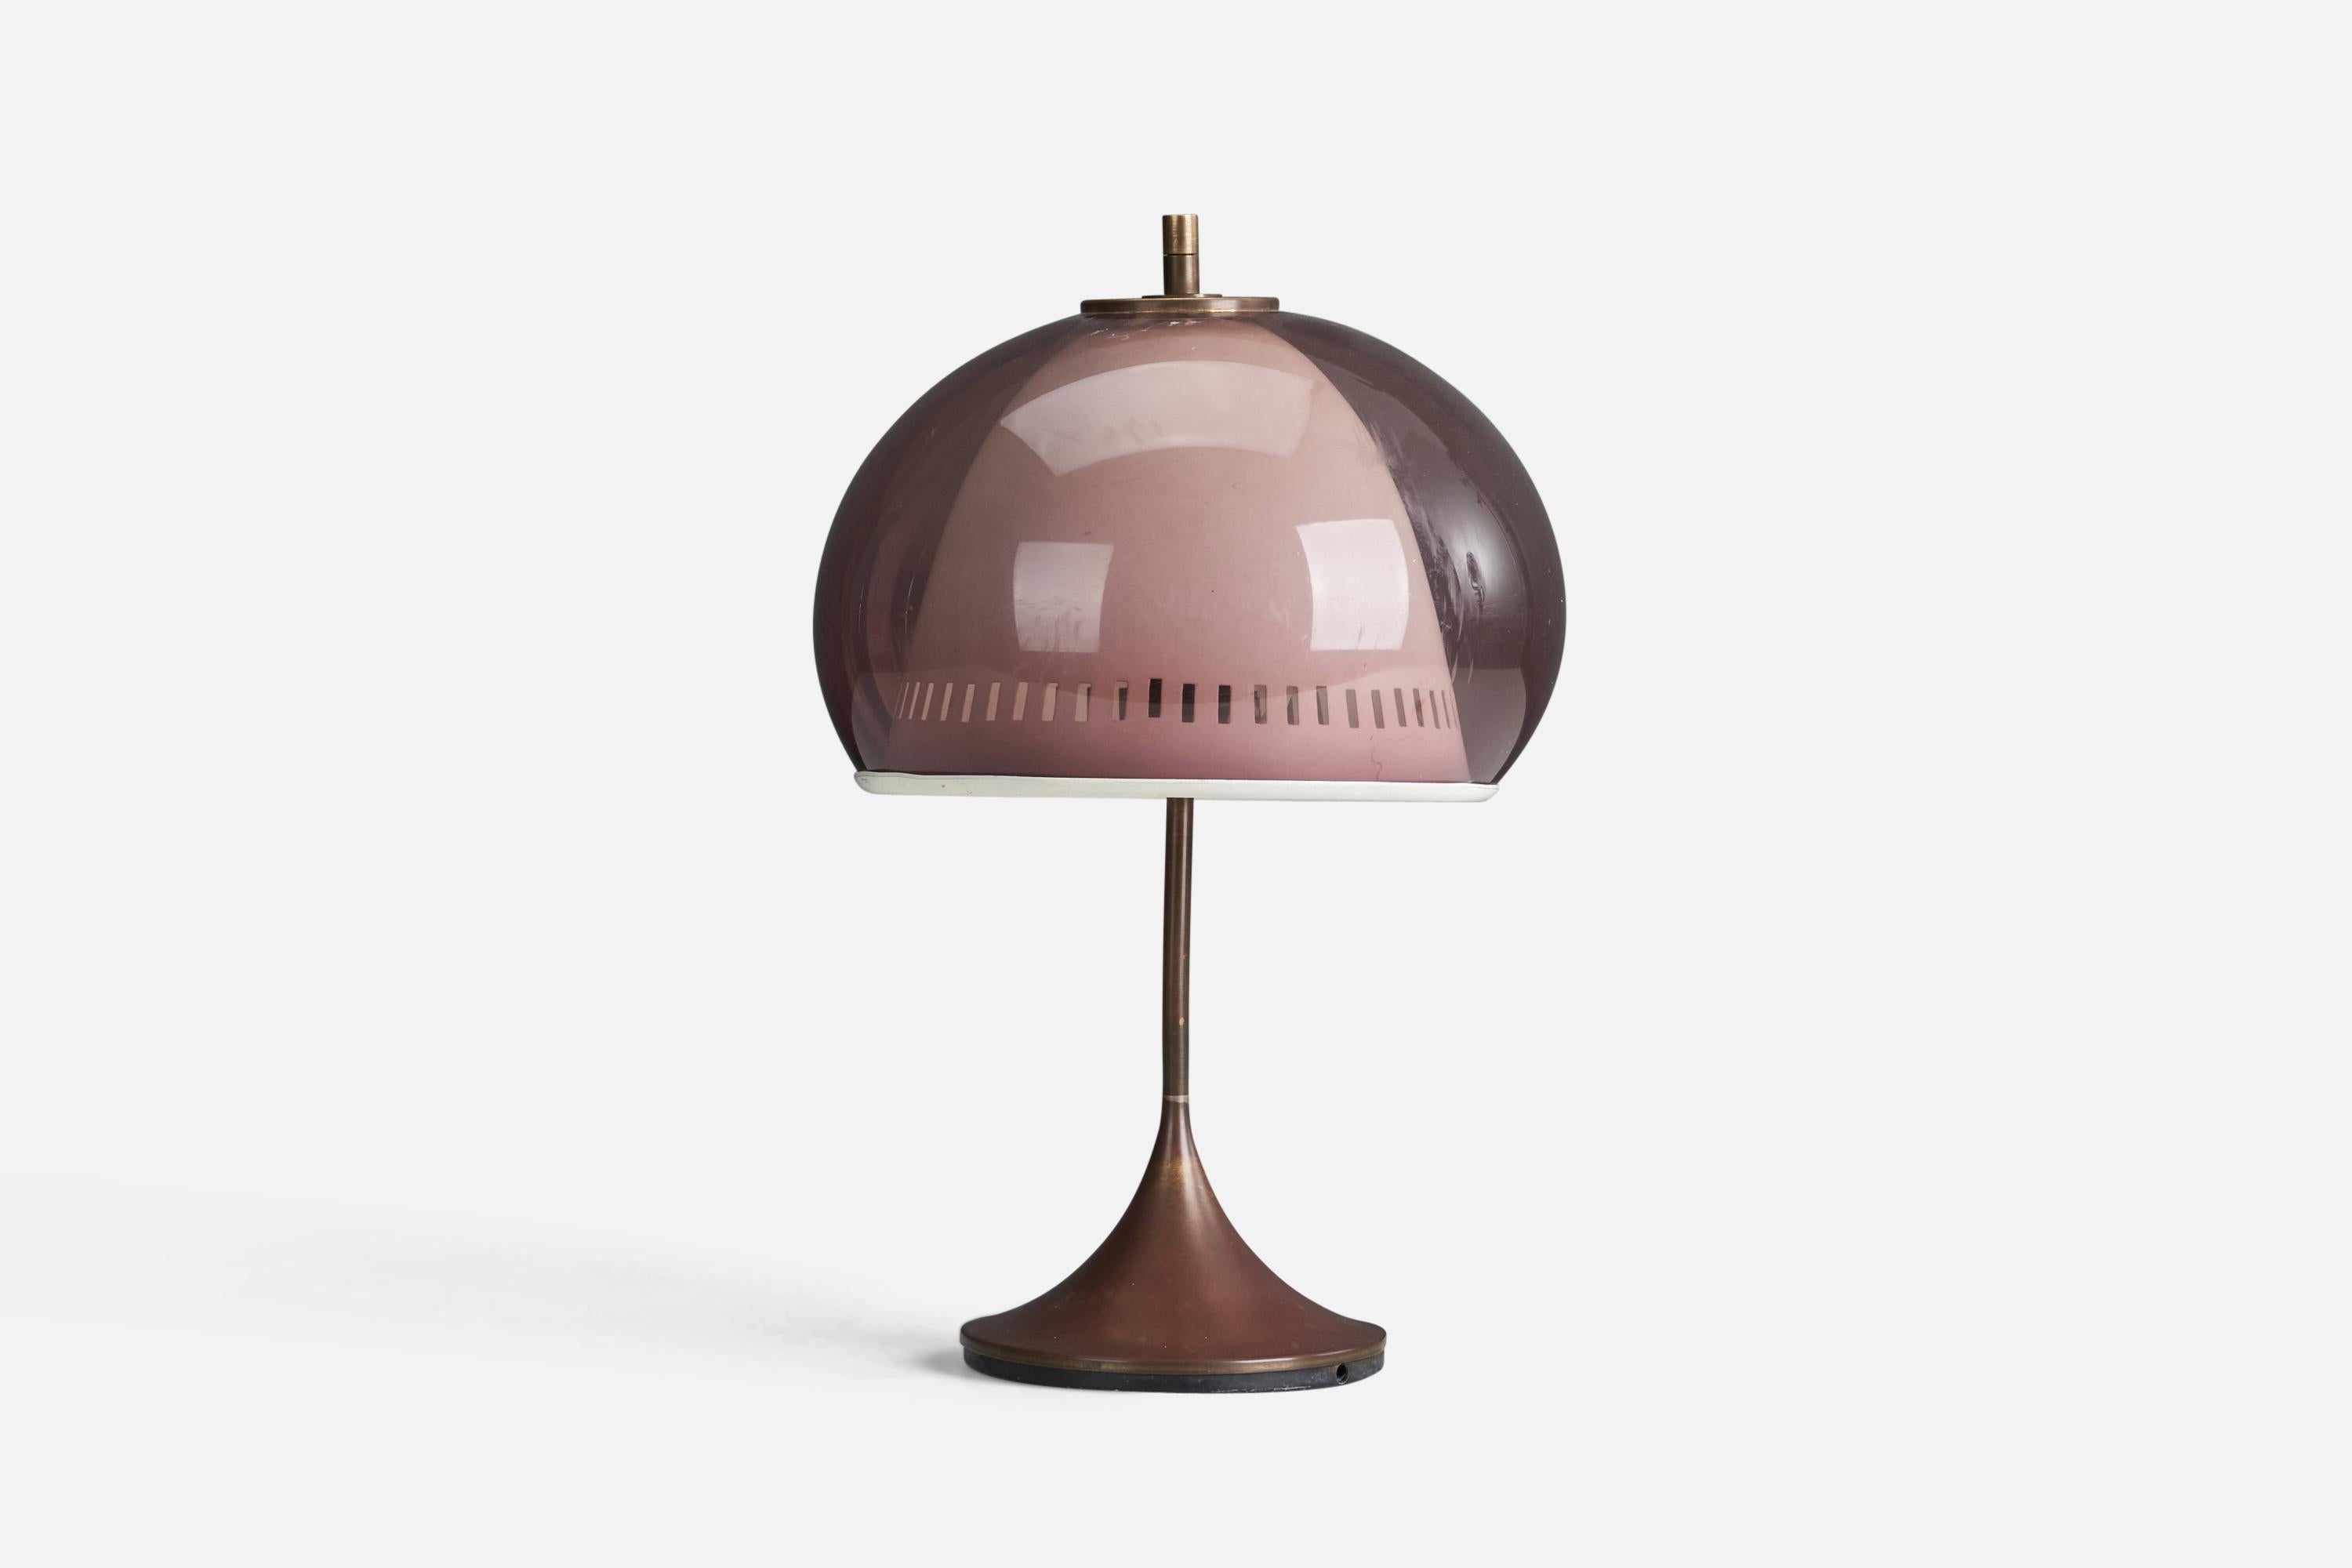 A purple acrylic, metal and brass table lamp designed by Angelo Brotto and produced by Esperia, Italy, 1950s.

Socket takes standard E-26 medium base bulb.

There is no maximum wattage stated on the fixture.